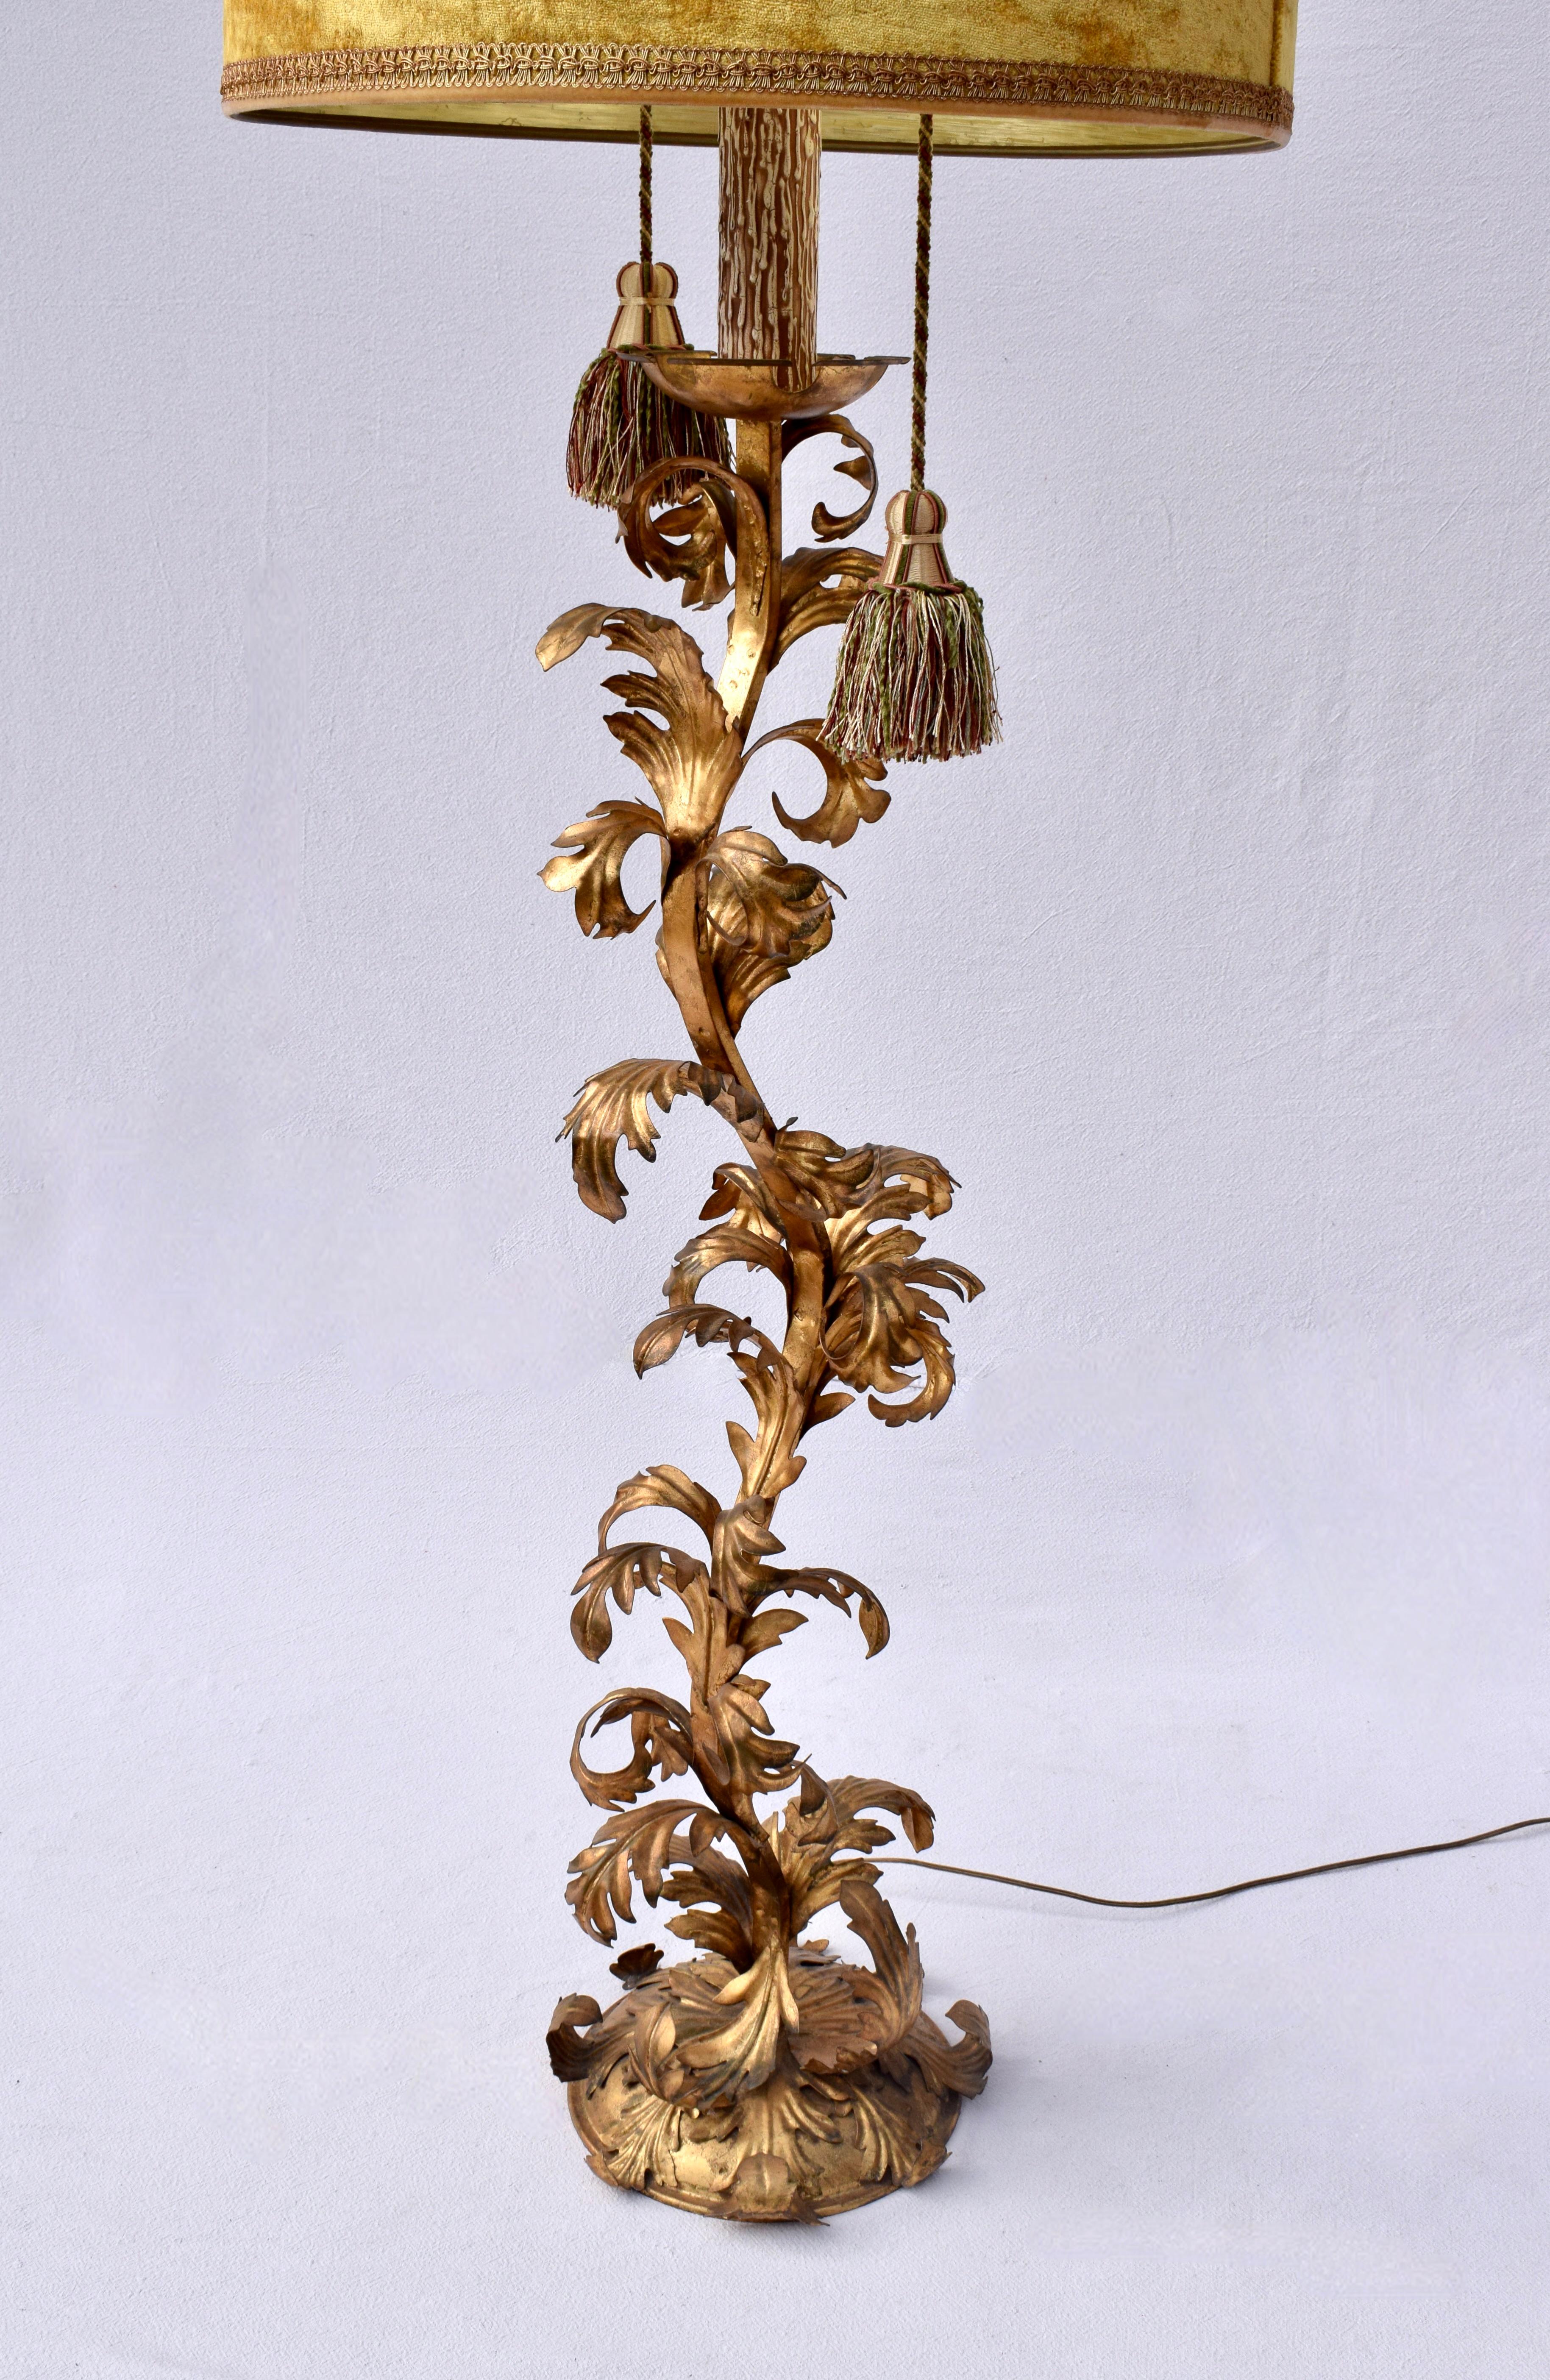 Magnificent Hollywood Regency Italian Gold Gilt Iron Floor Lamp with striking serpentine form  heavily clad with dramatic Acanthus leaves motif. Original Shade & 10